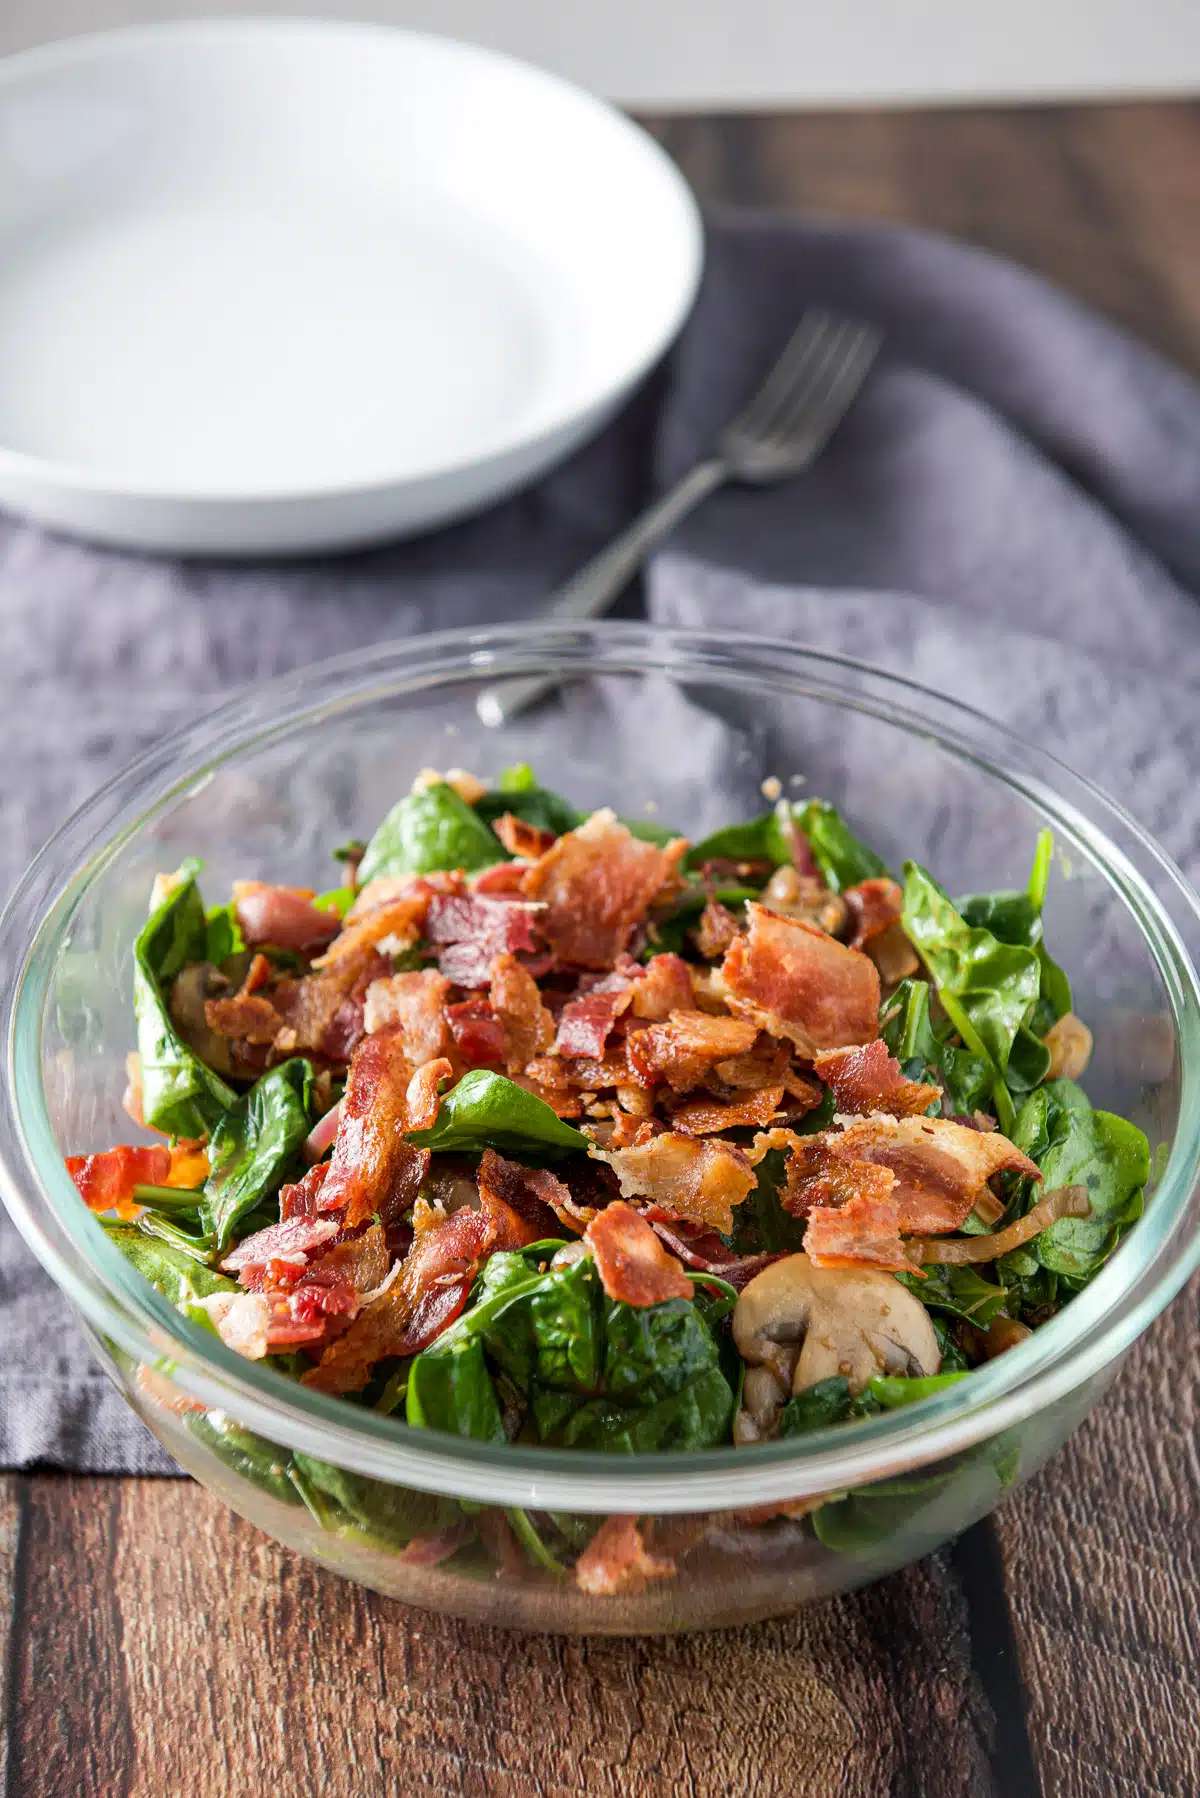 A glass bowl with the salad topped with pieces of bacon on a table with a napkin, fork and deep dish